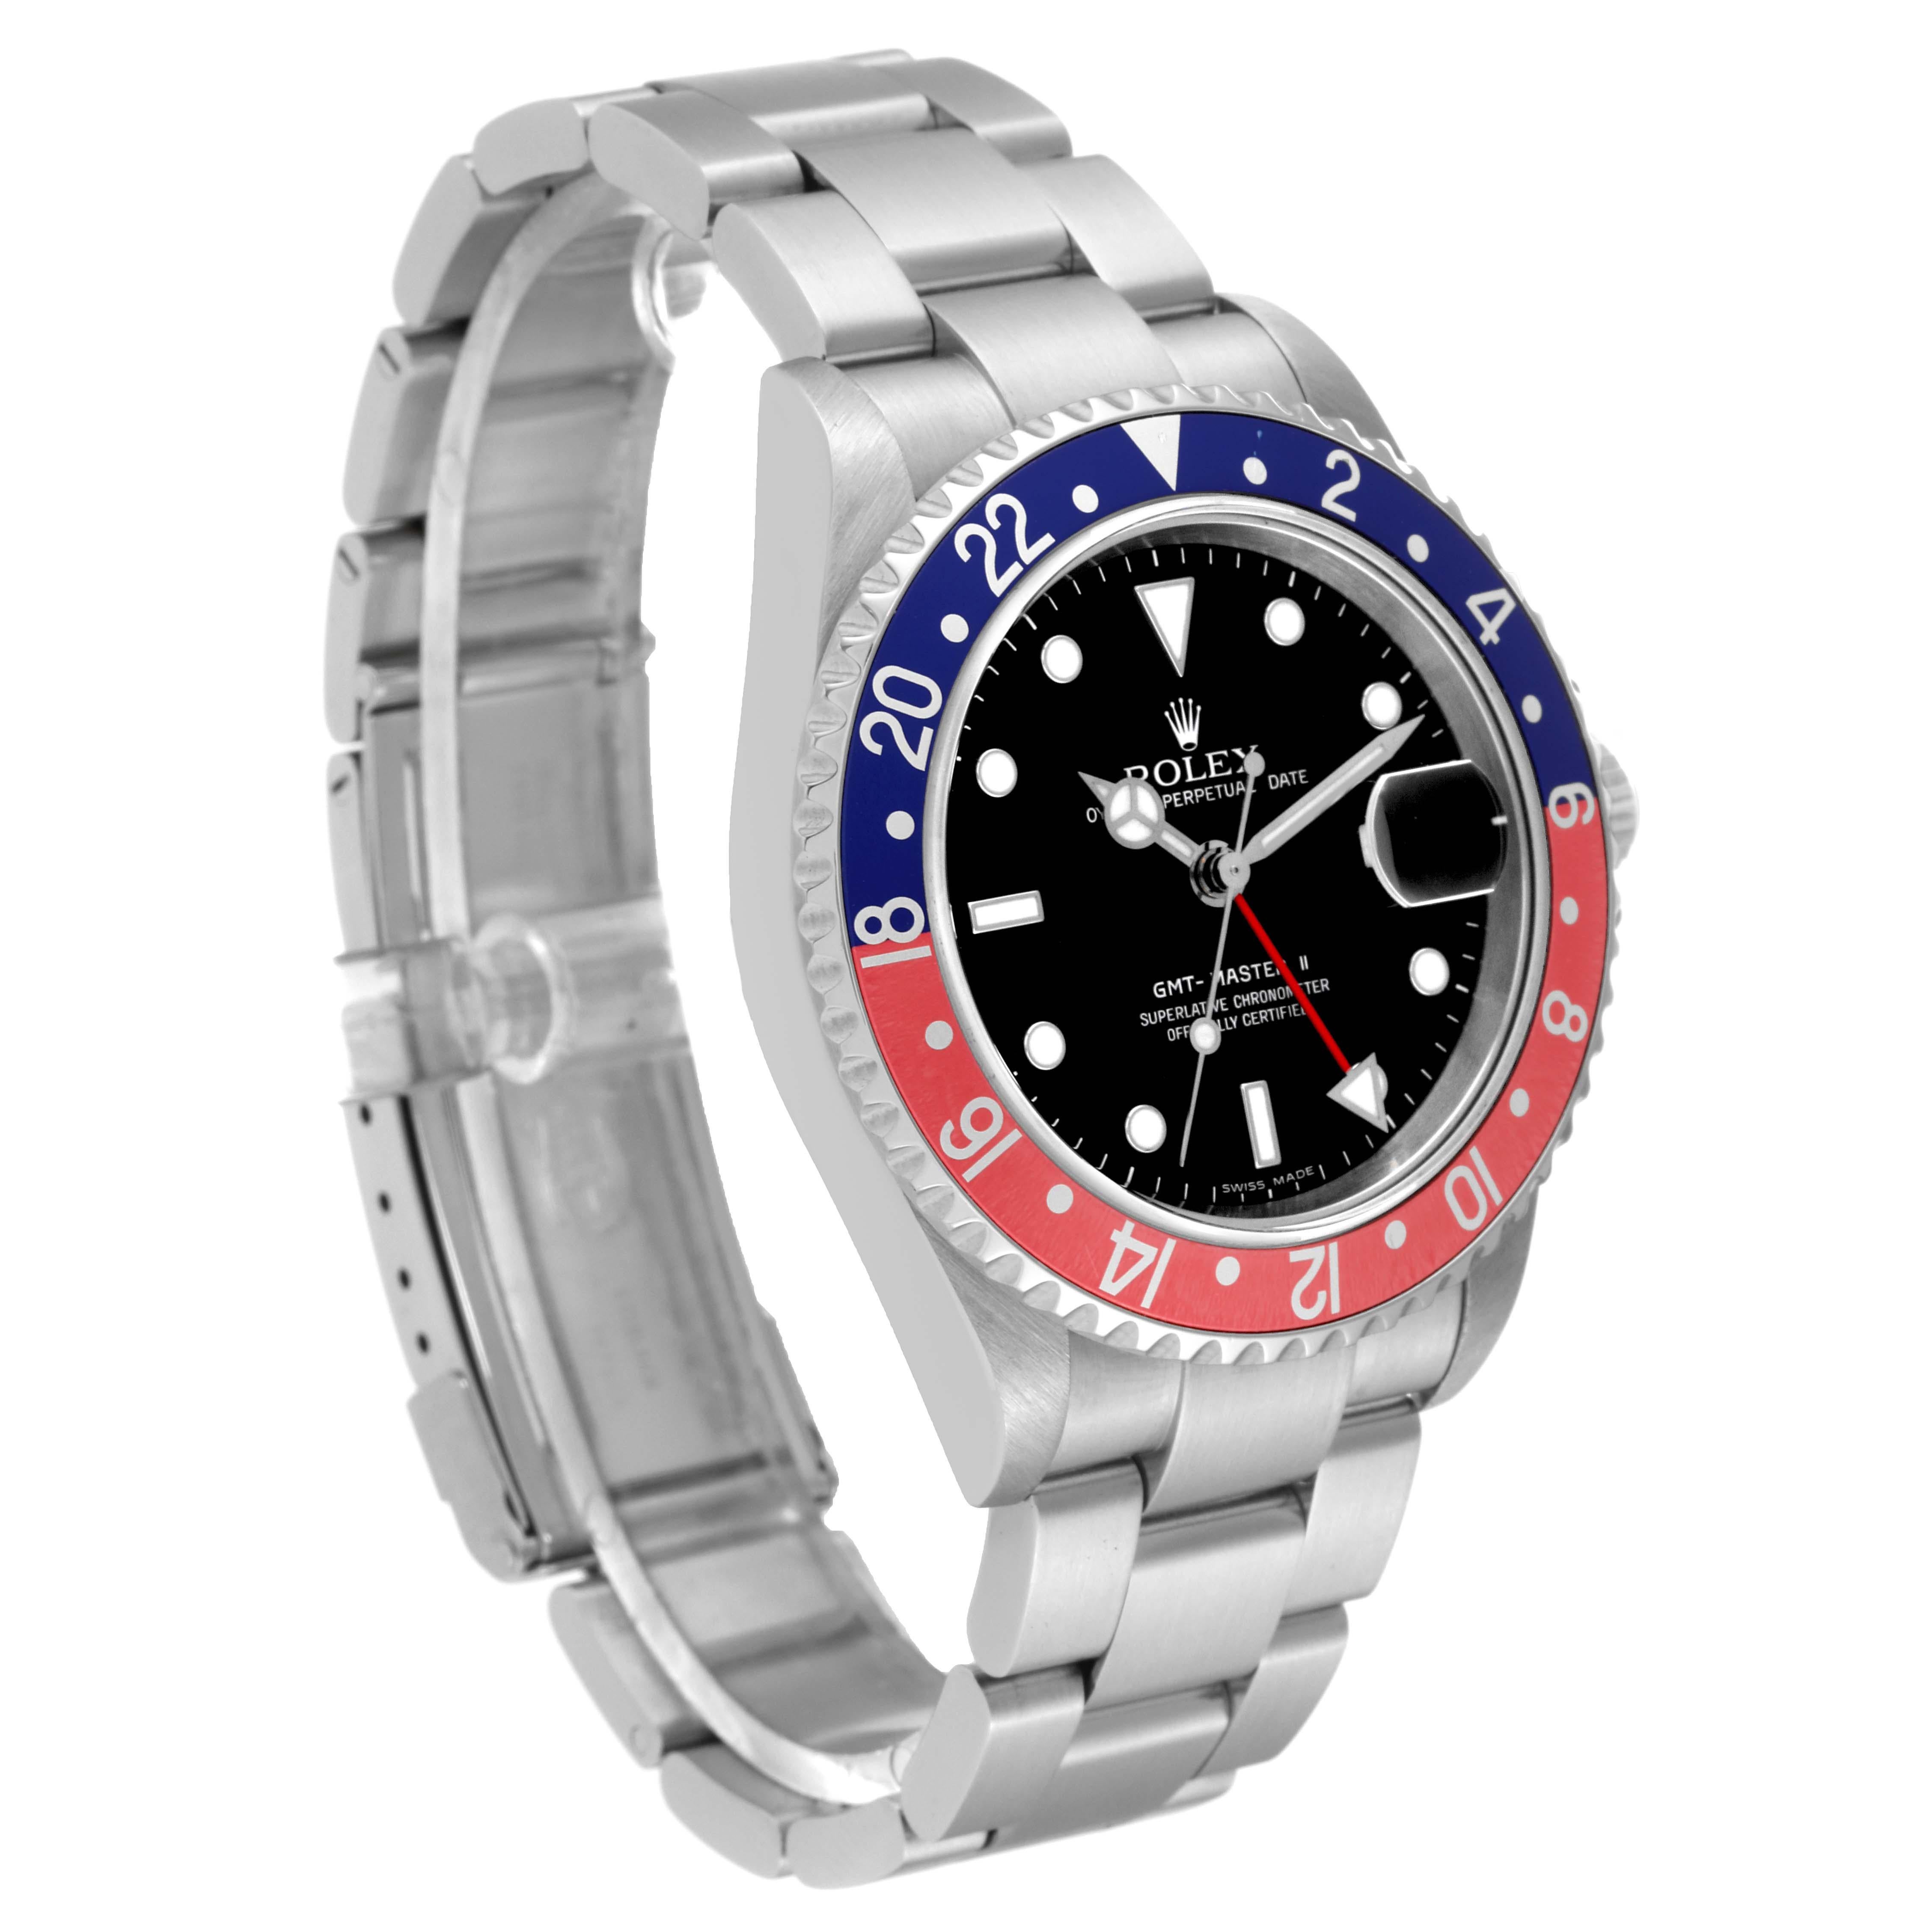 Rolex GMT Master II Blue Red Pepsi Error Dial Steel Mens Watch 16710 Box Papers 8